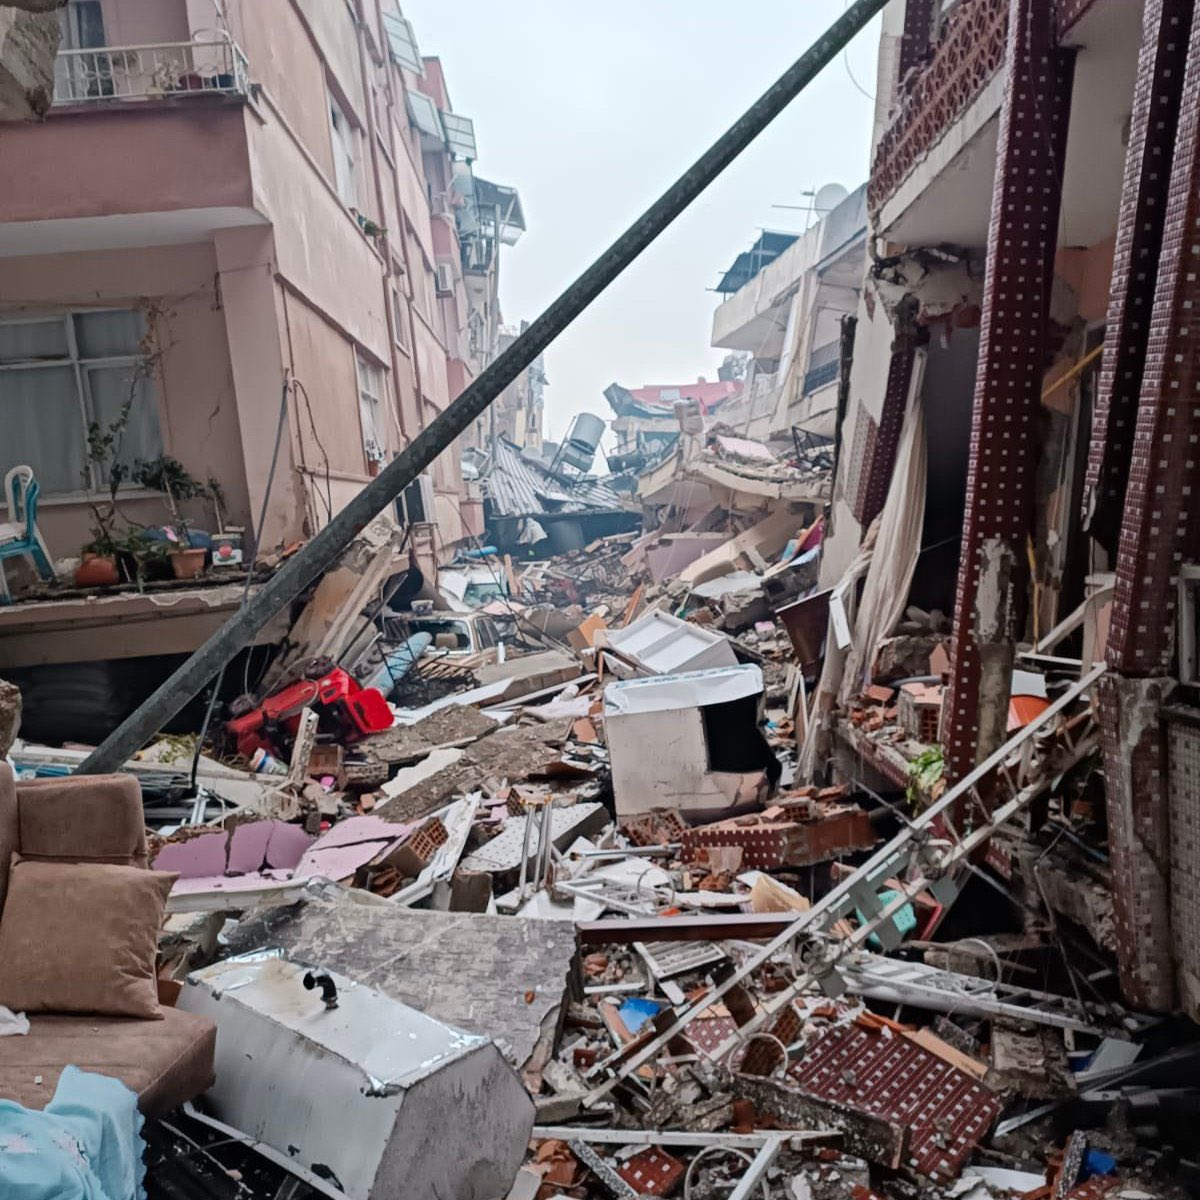 IMPORTANT PLEASE READ AND SHARE 48 hours have passed since the earthquakes and there are still people trapped under the rubble and there are still aftershocks. 10 cities affected by the earthquake and many cities affected by it are completely destroyed, +